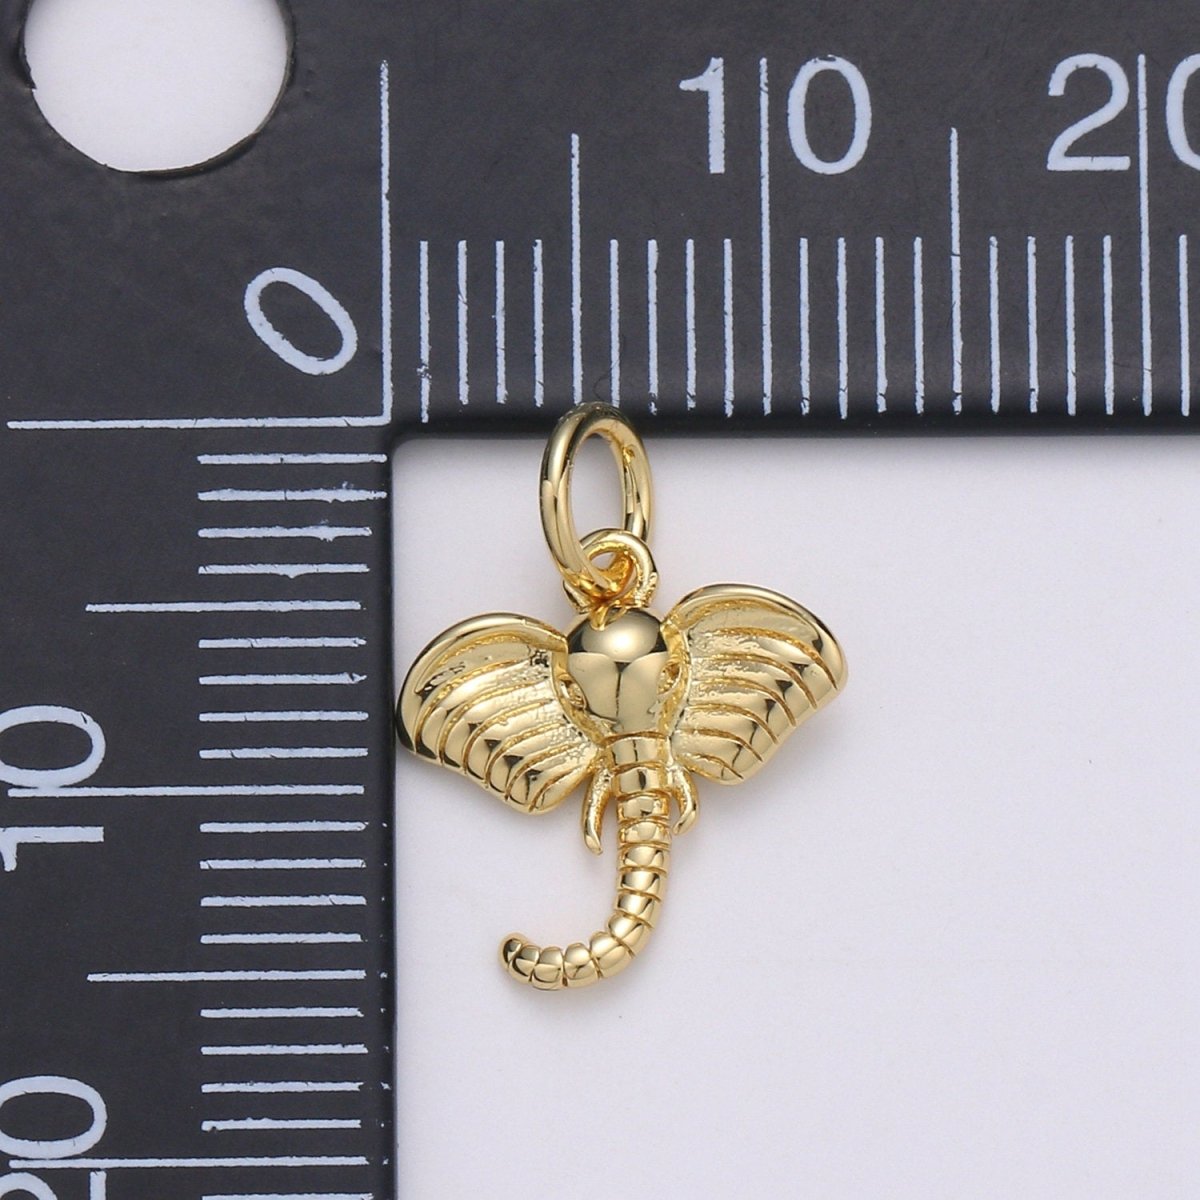 Teeny Tiny Elephant Charm Dainty Elephant Pendant 14kt Gold Filled Charm Animal Necklace // Gift for Her Birthday Baby Shower Gift Jewelry C-515 - DLUXCA